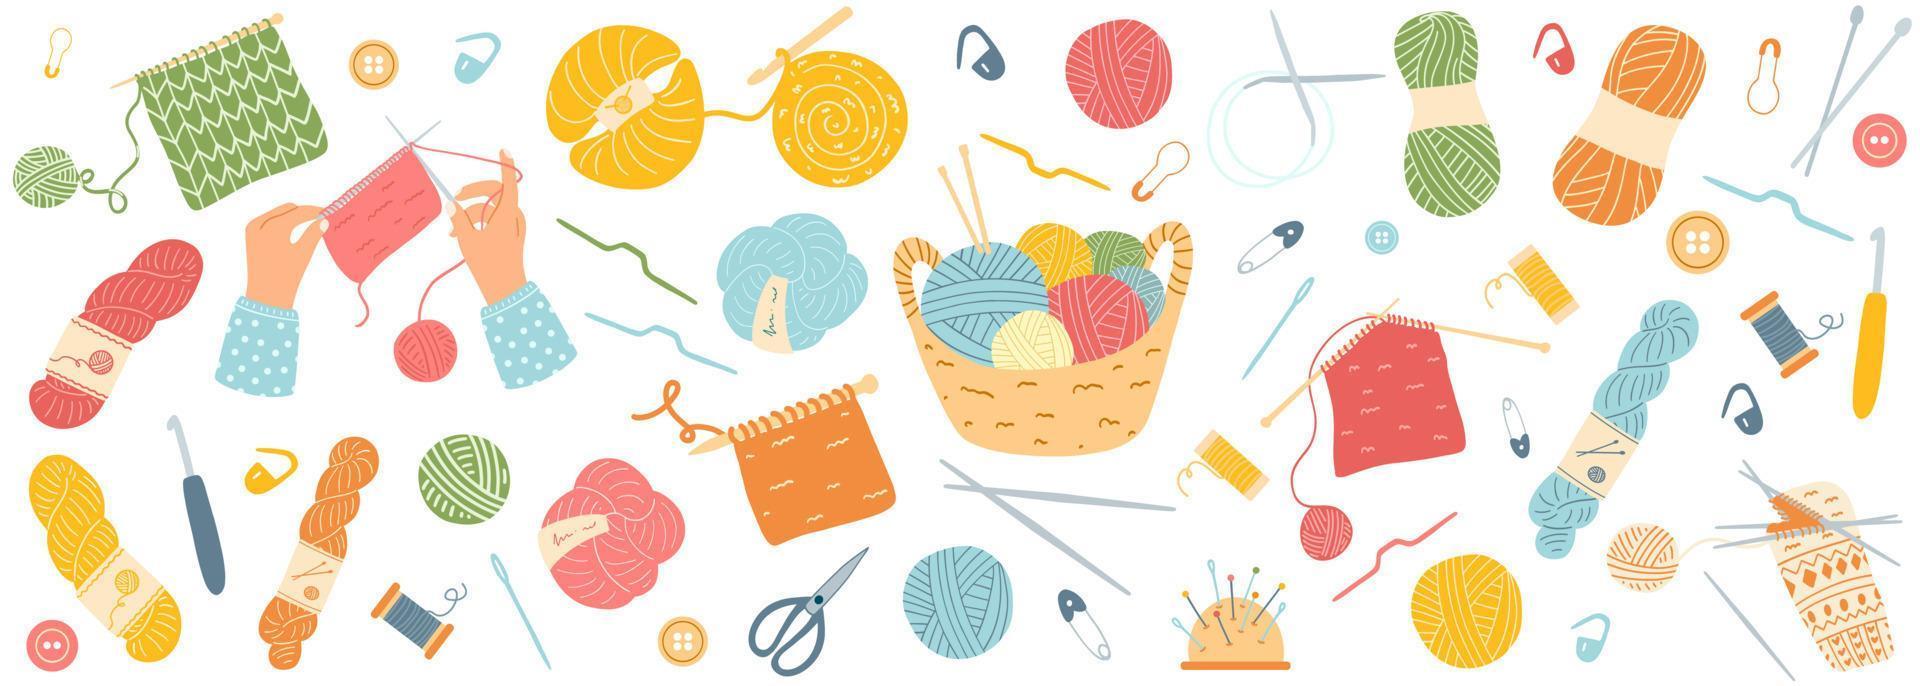 Hand drawn set of knitting accessories. Vector illustration of yarn, pins, buttons, thread, needles, crochet, spool, pincushion, scissors. Concept of hobby, leisure time